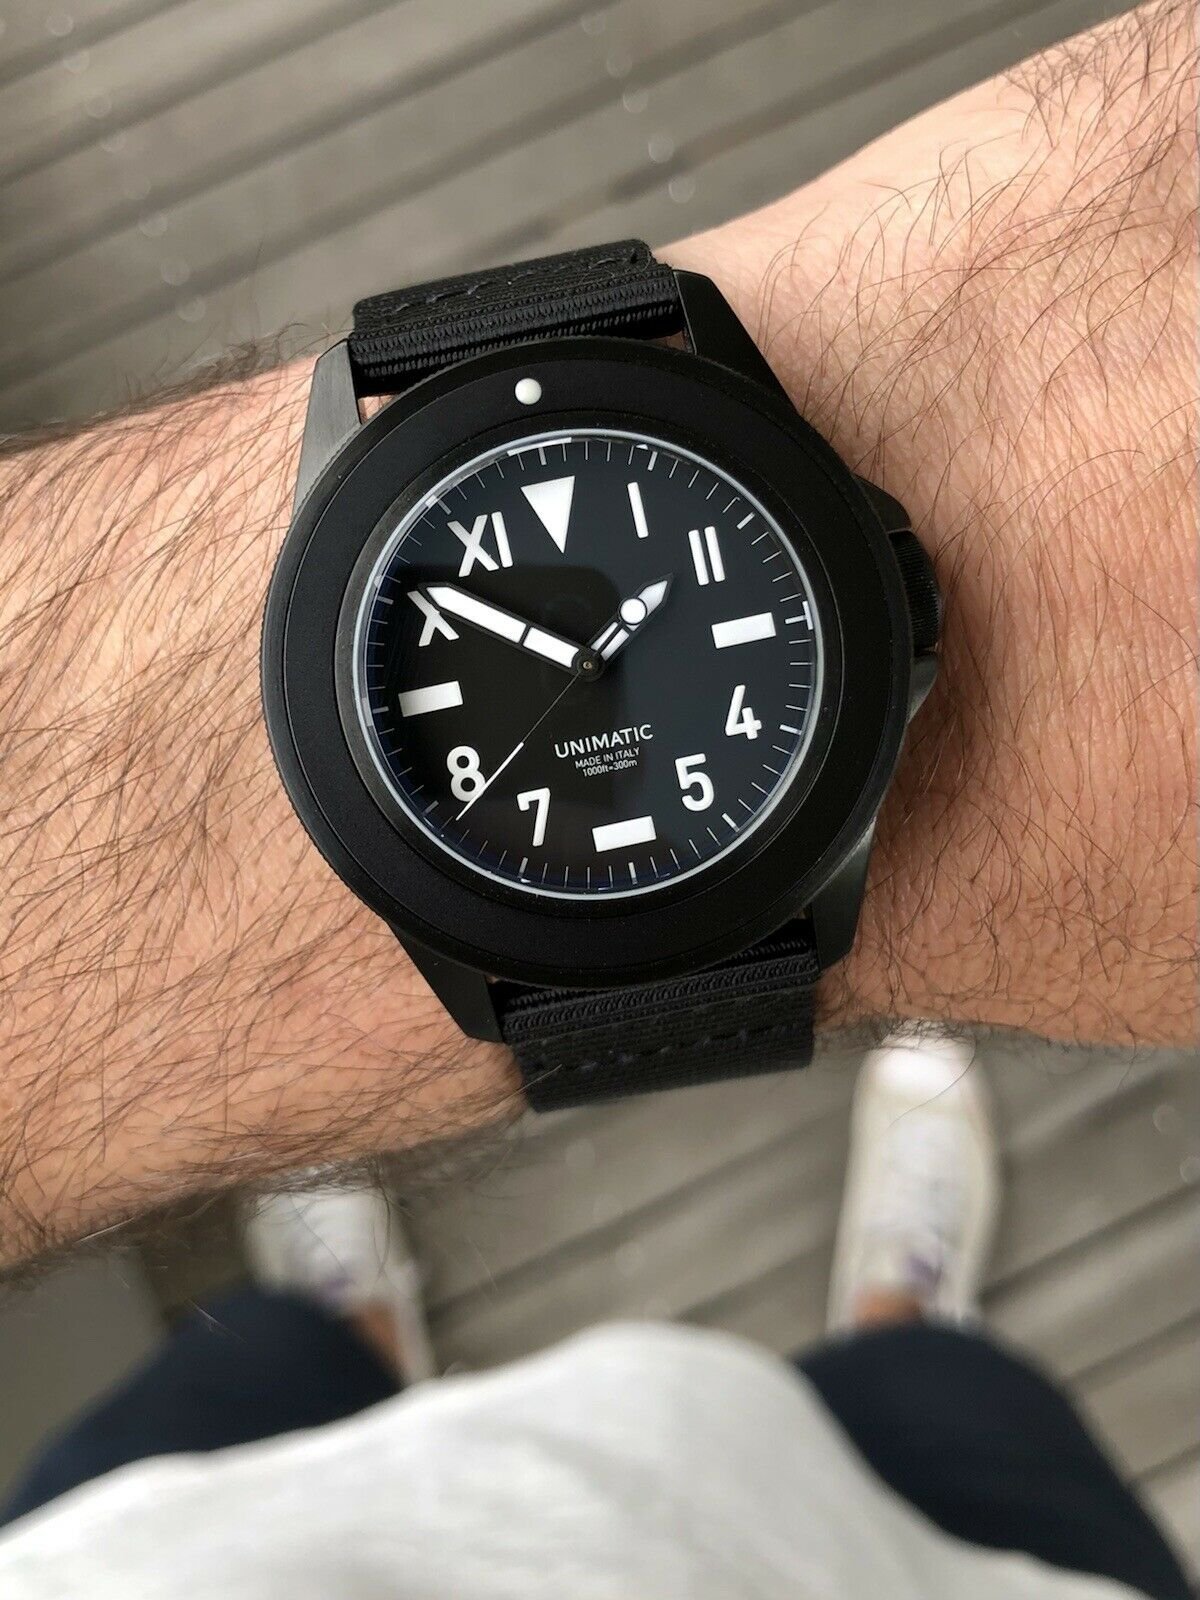 Unimatic] Why does Unimatic's diver get so much hate? : r/Watches